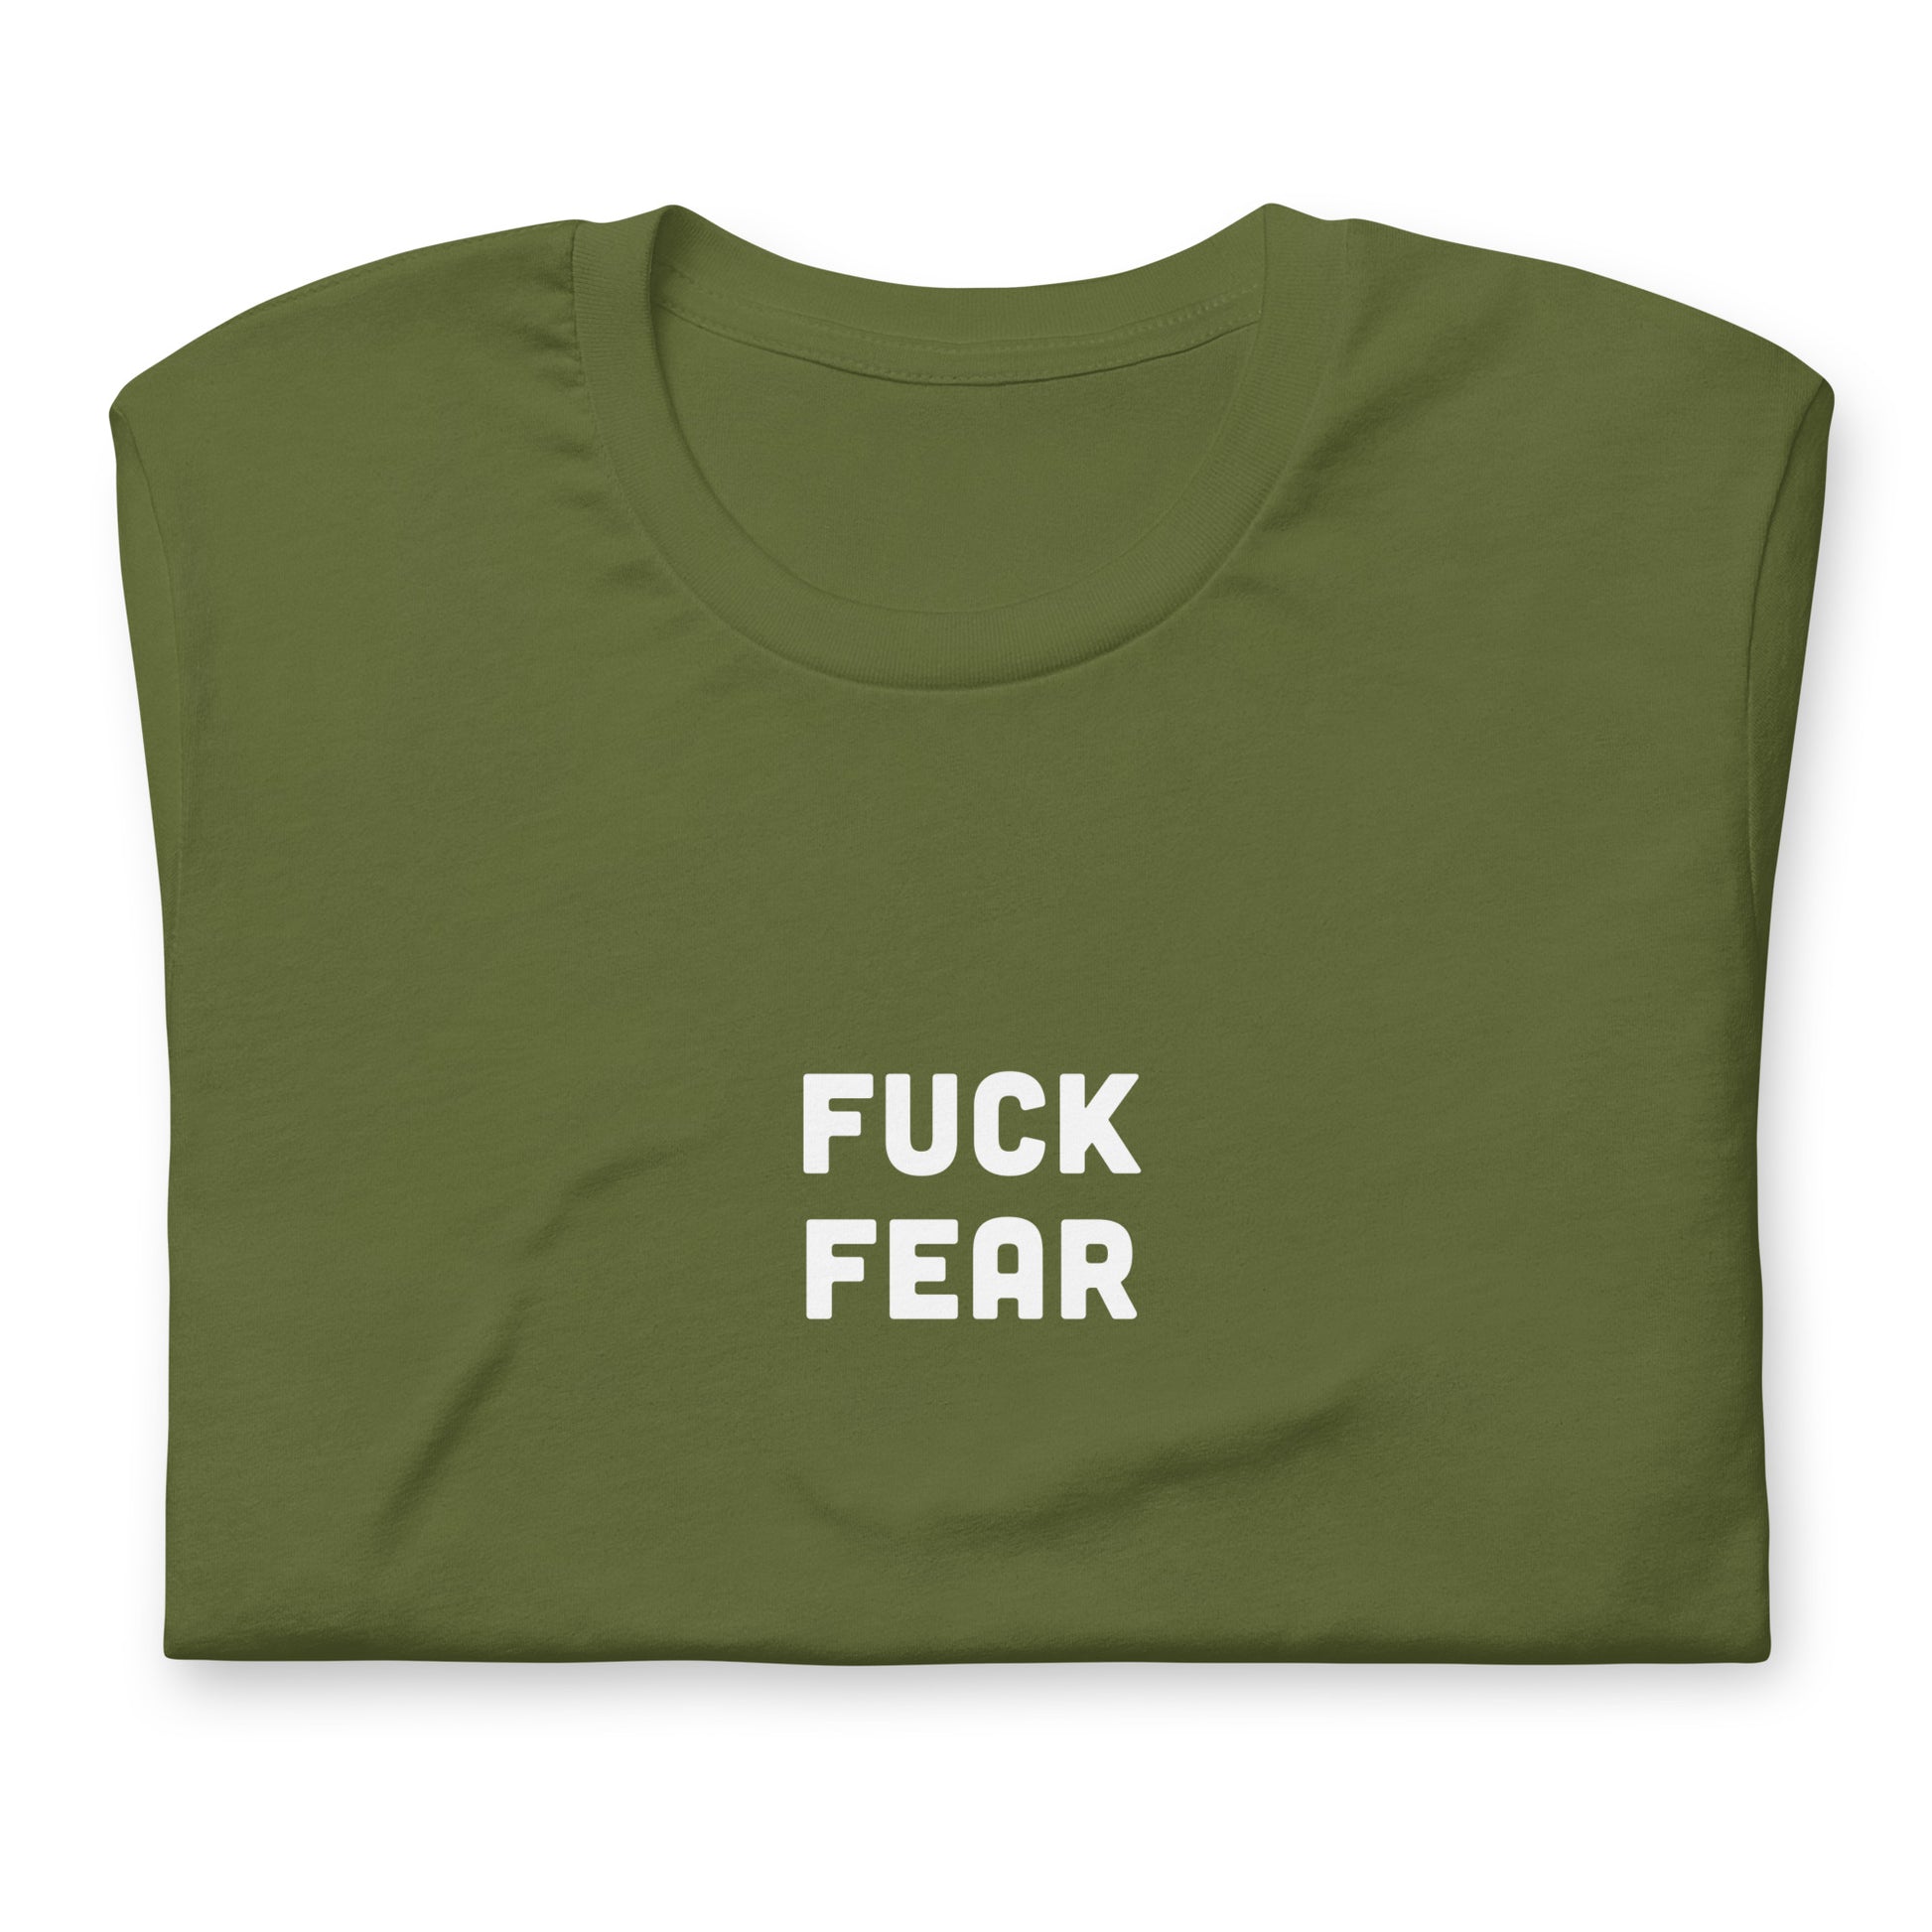 Fuck Fear T-Shirt Size S Color Navy